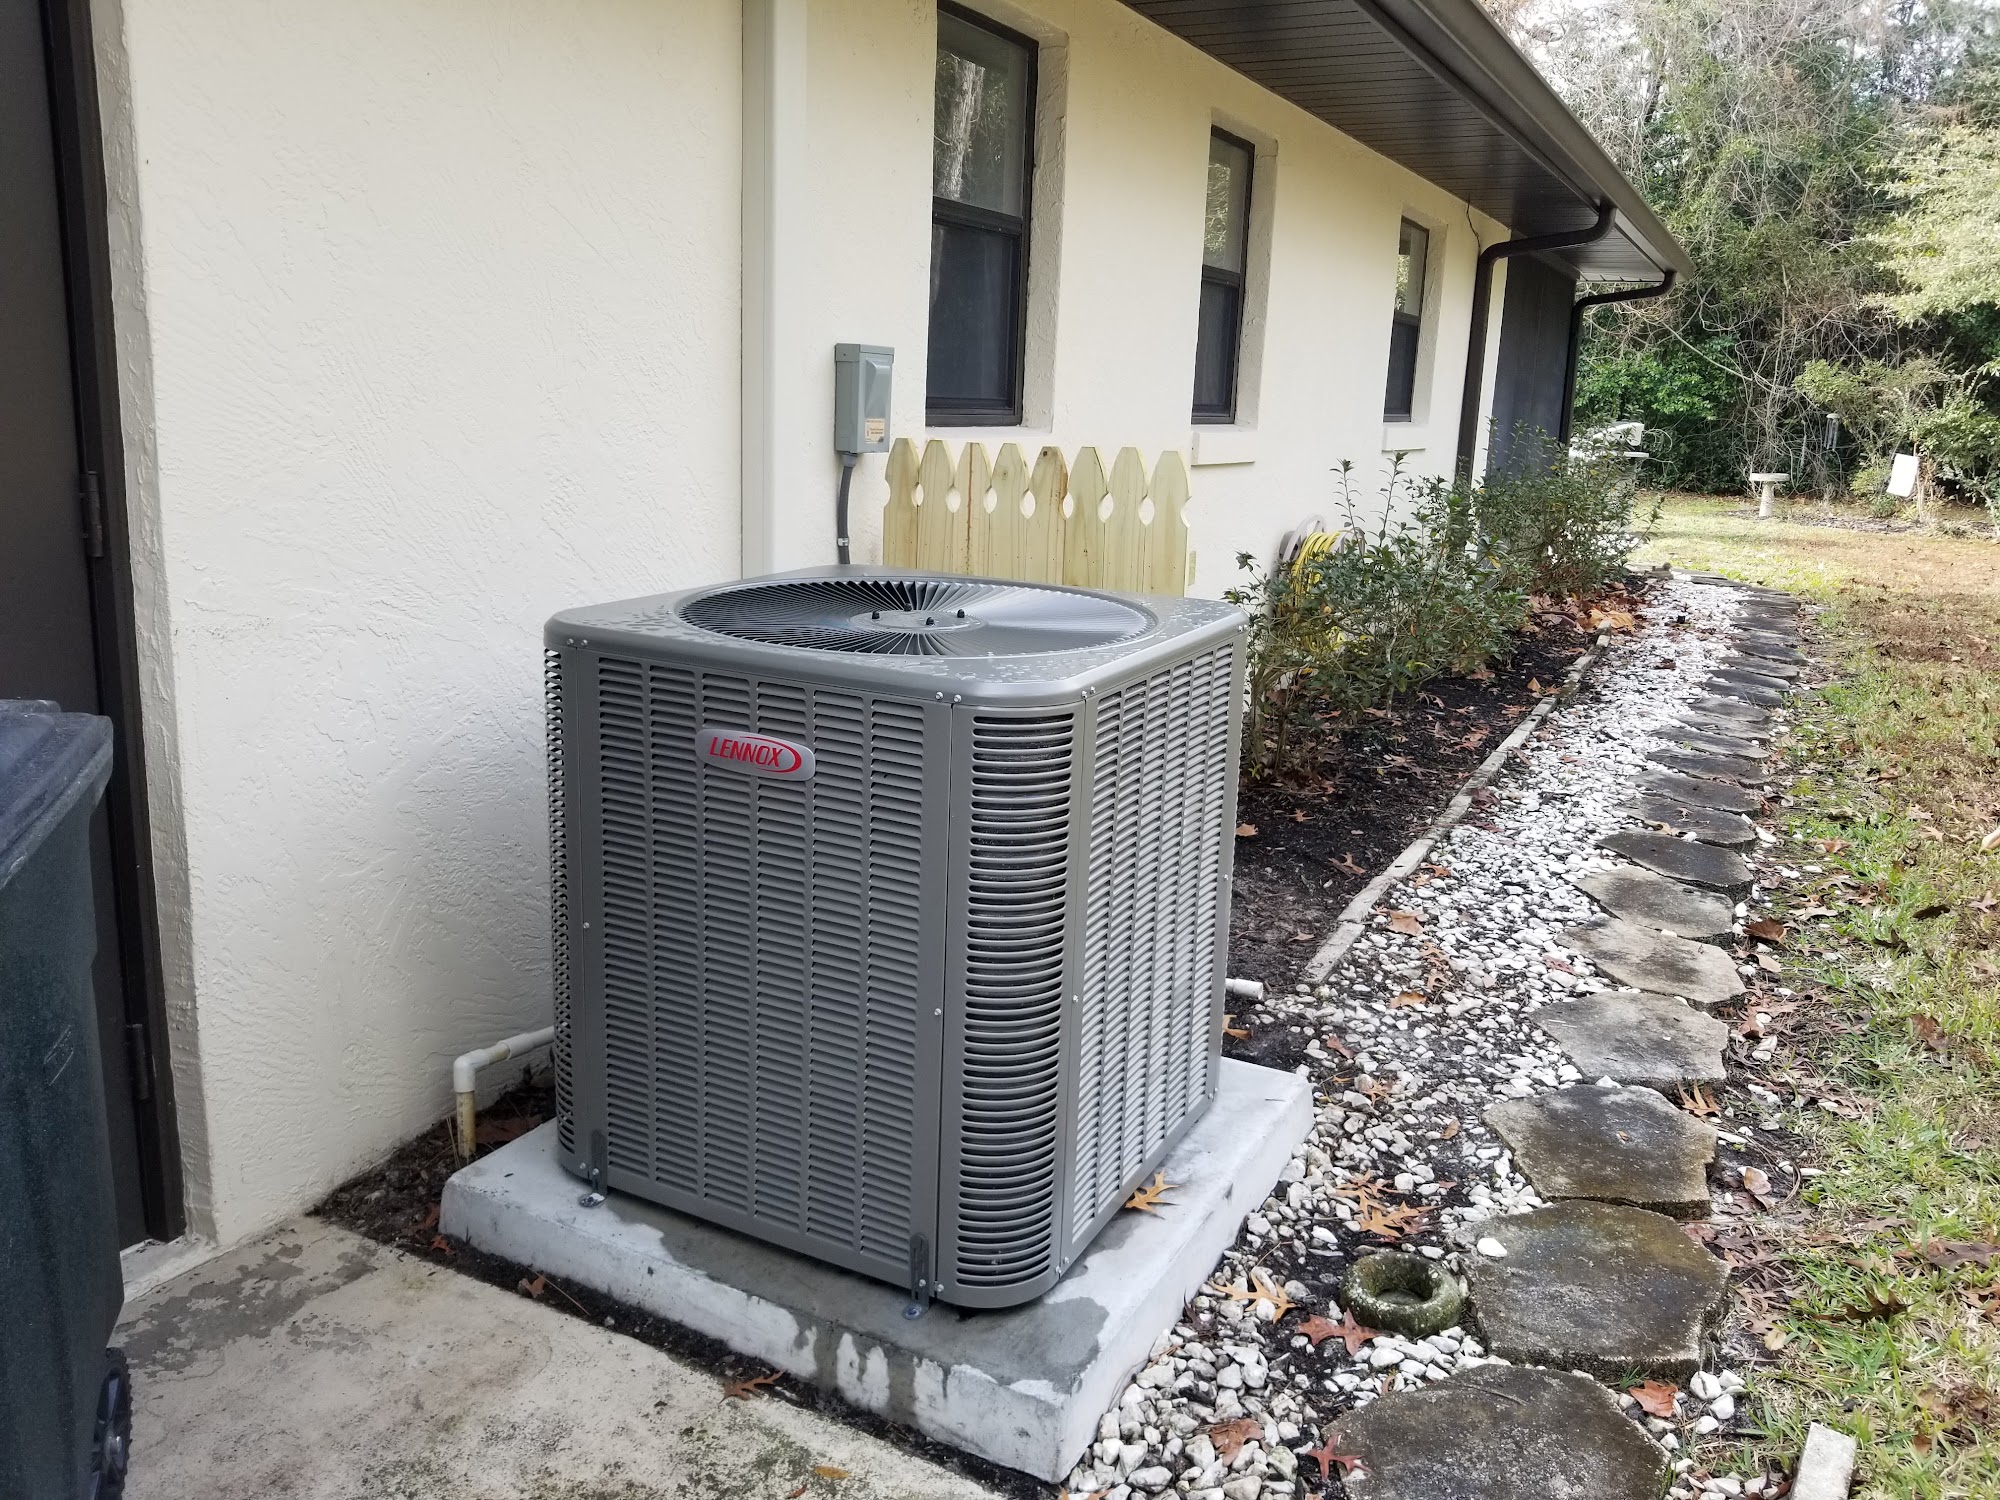 Daniel's Heating & Air Conditioning